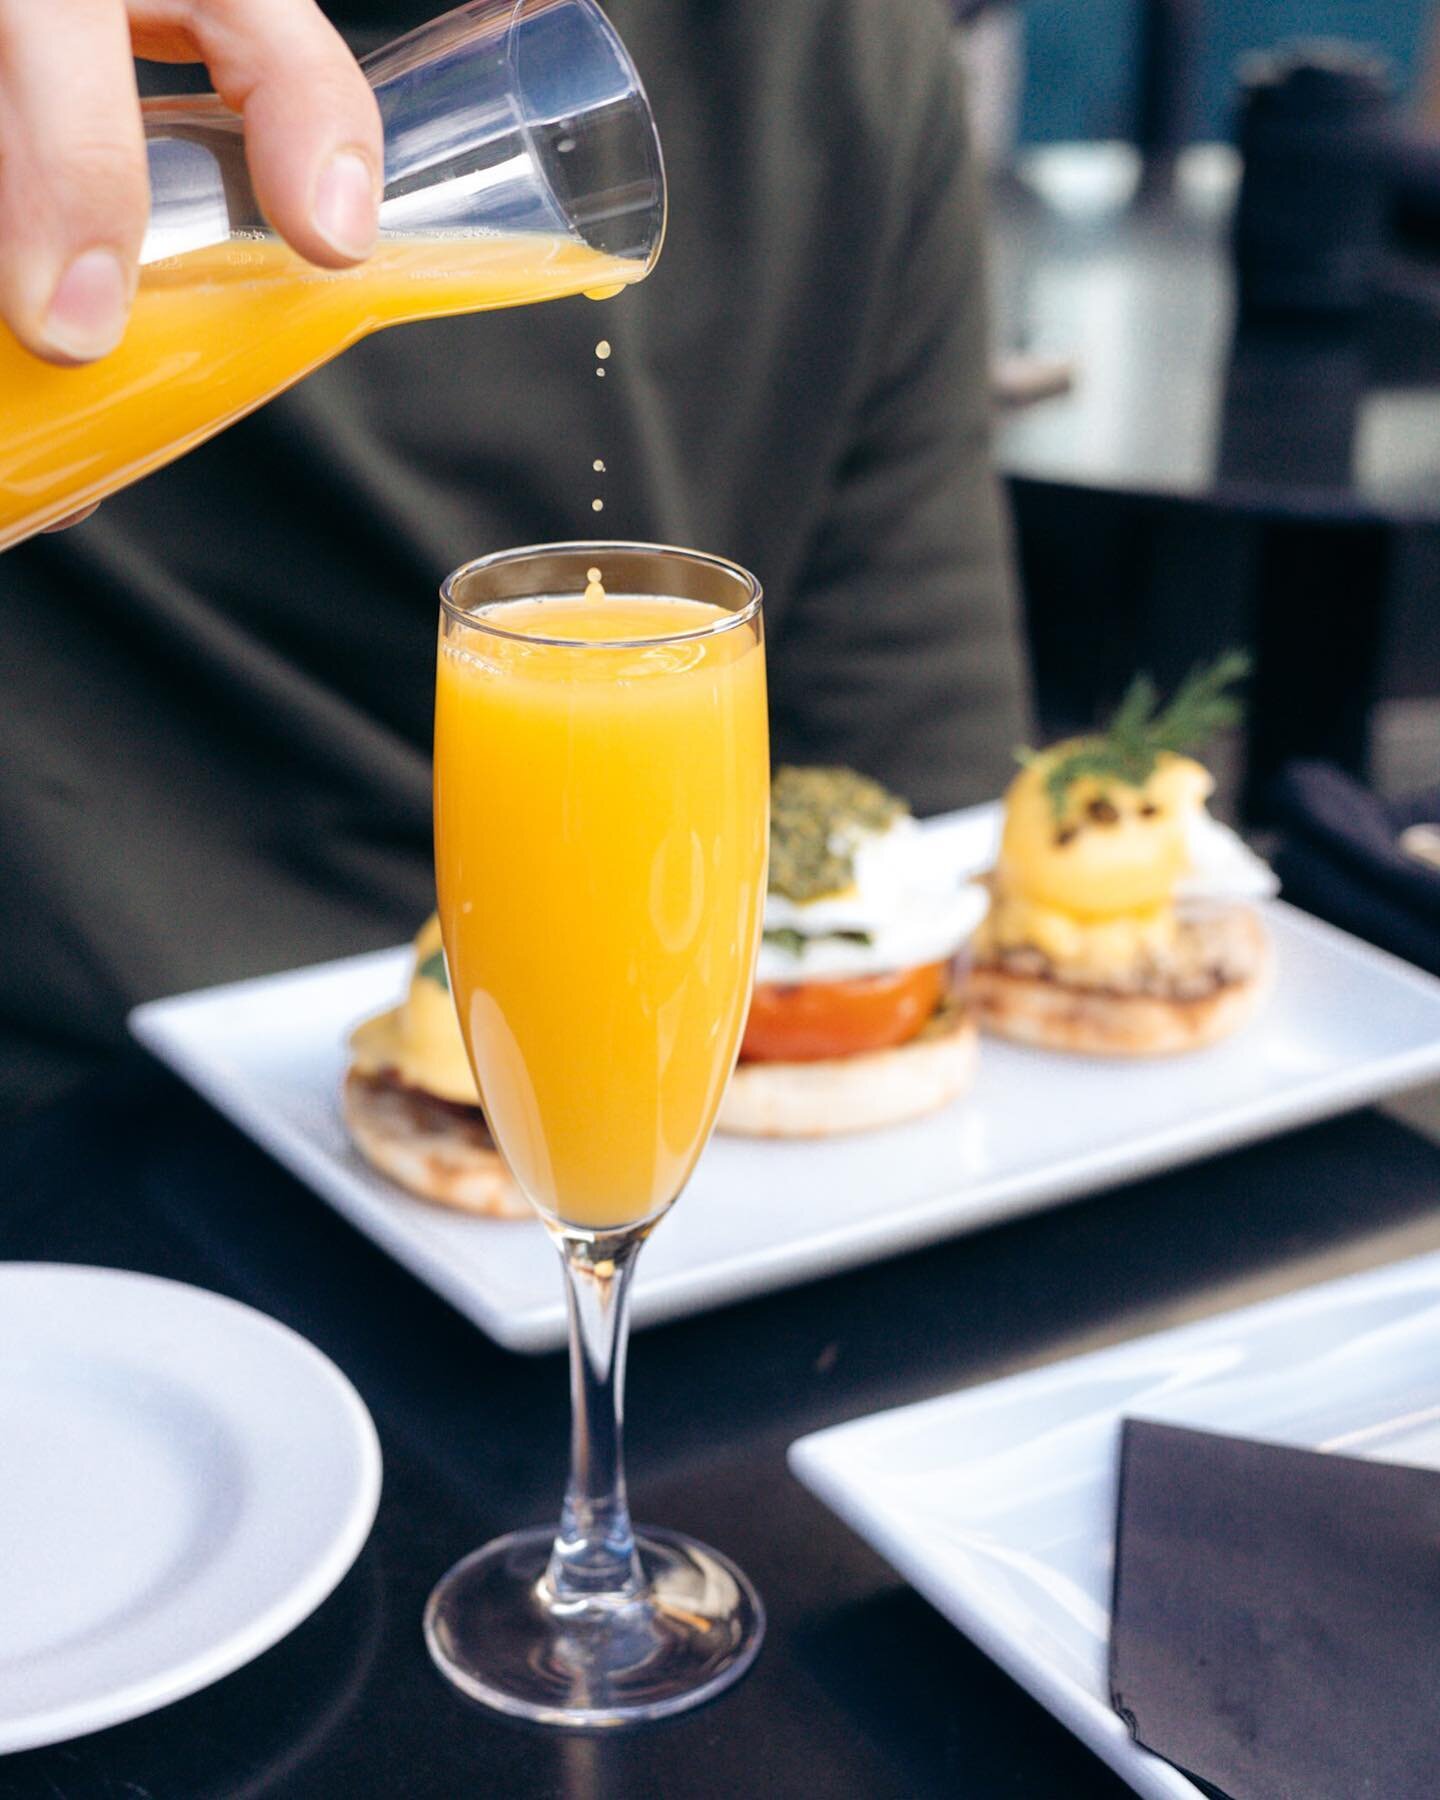 Happy Mothers Day Weekend Whistler! 

Come treat your mom &amp; celebrate with a mimosa or two! 🥂🍊